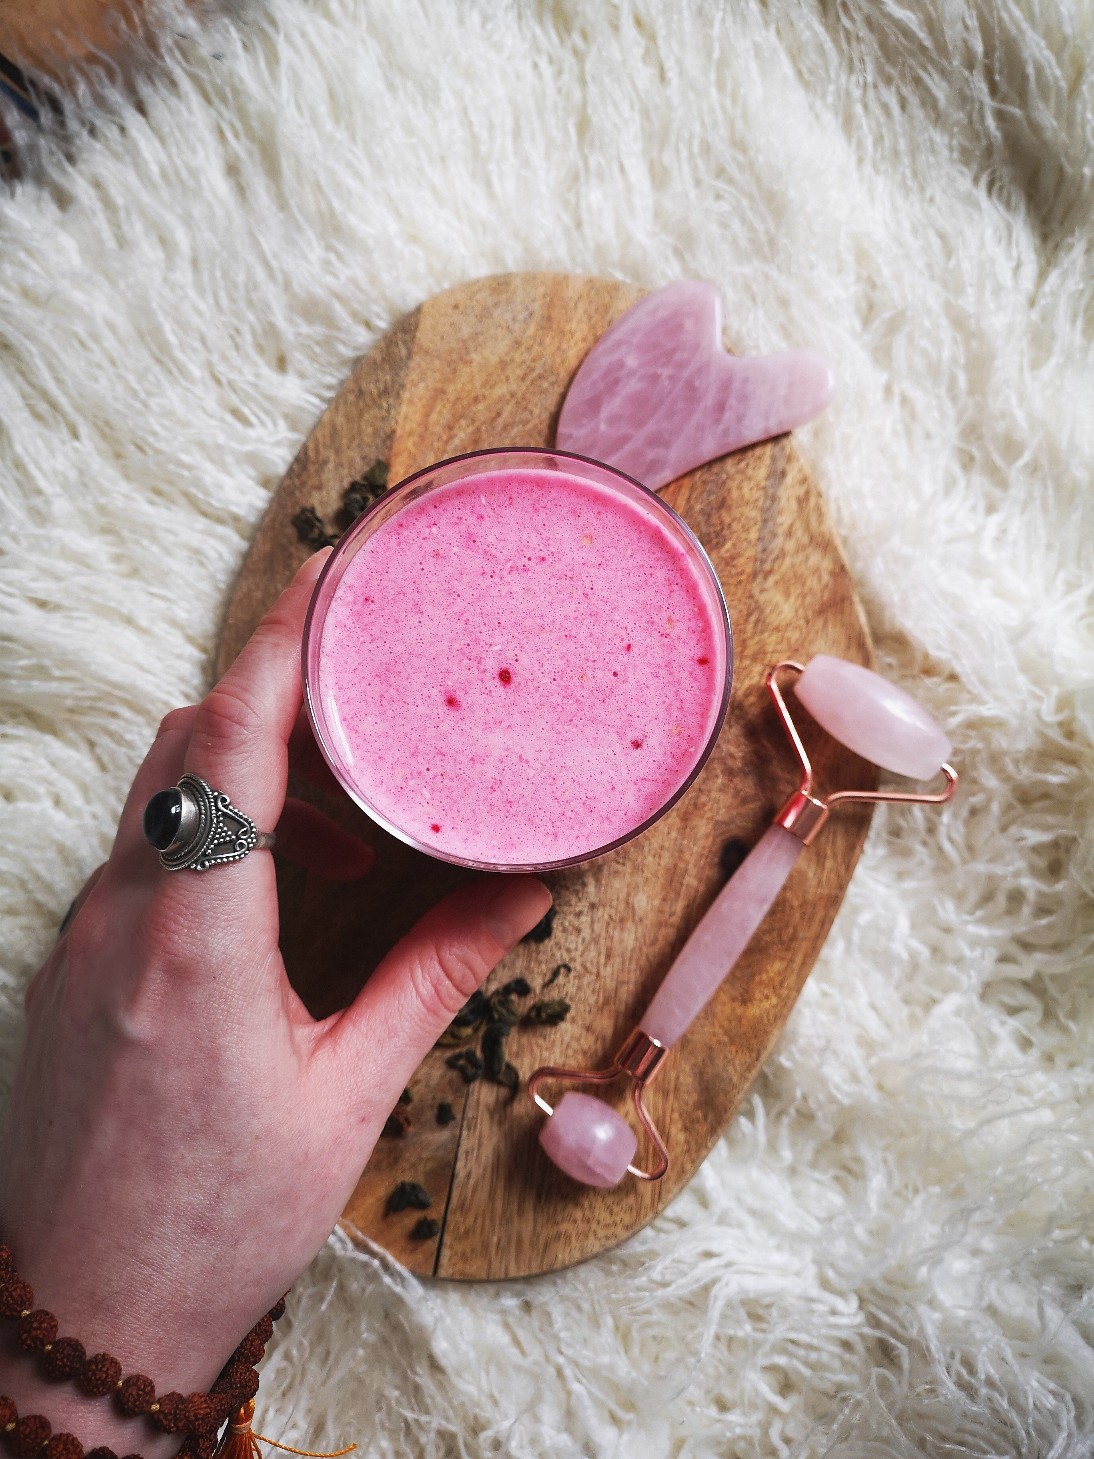 Pink vegan lassi in a cup on a wooden board, against a white faux fur rug background. A hand is holding the cup lightly.